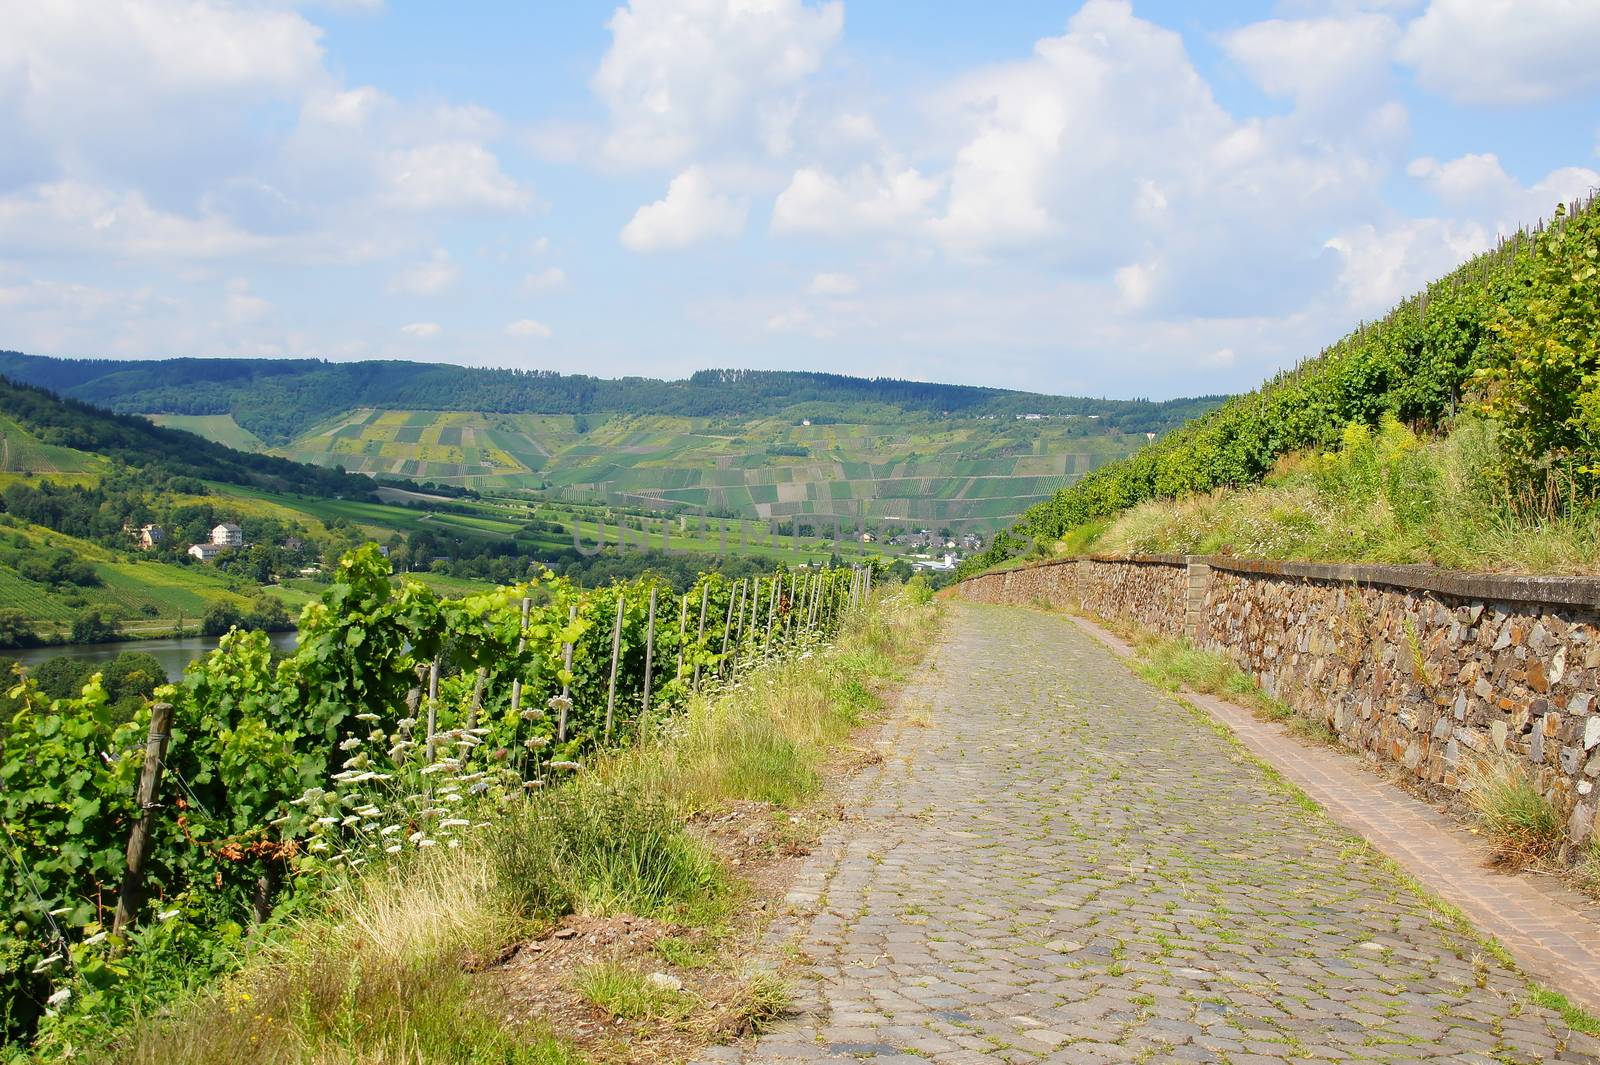 Paving the way from Traben-Trarbach to Wolf